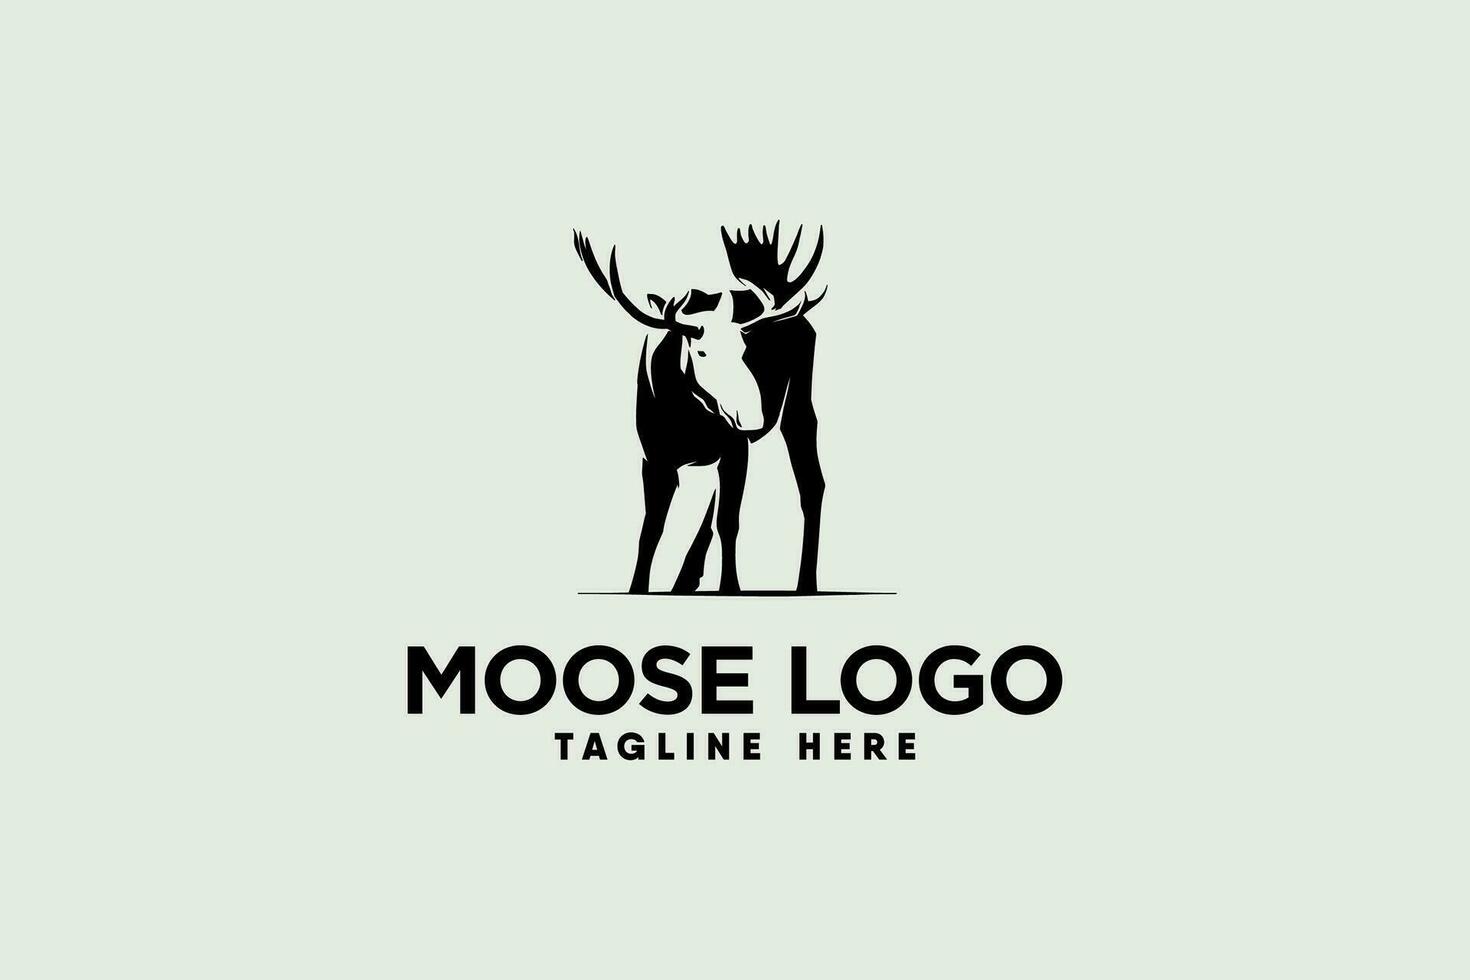 Moose logo vector with modern and clean silhouette style